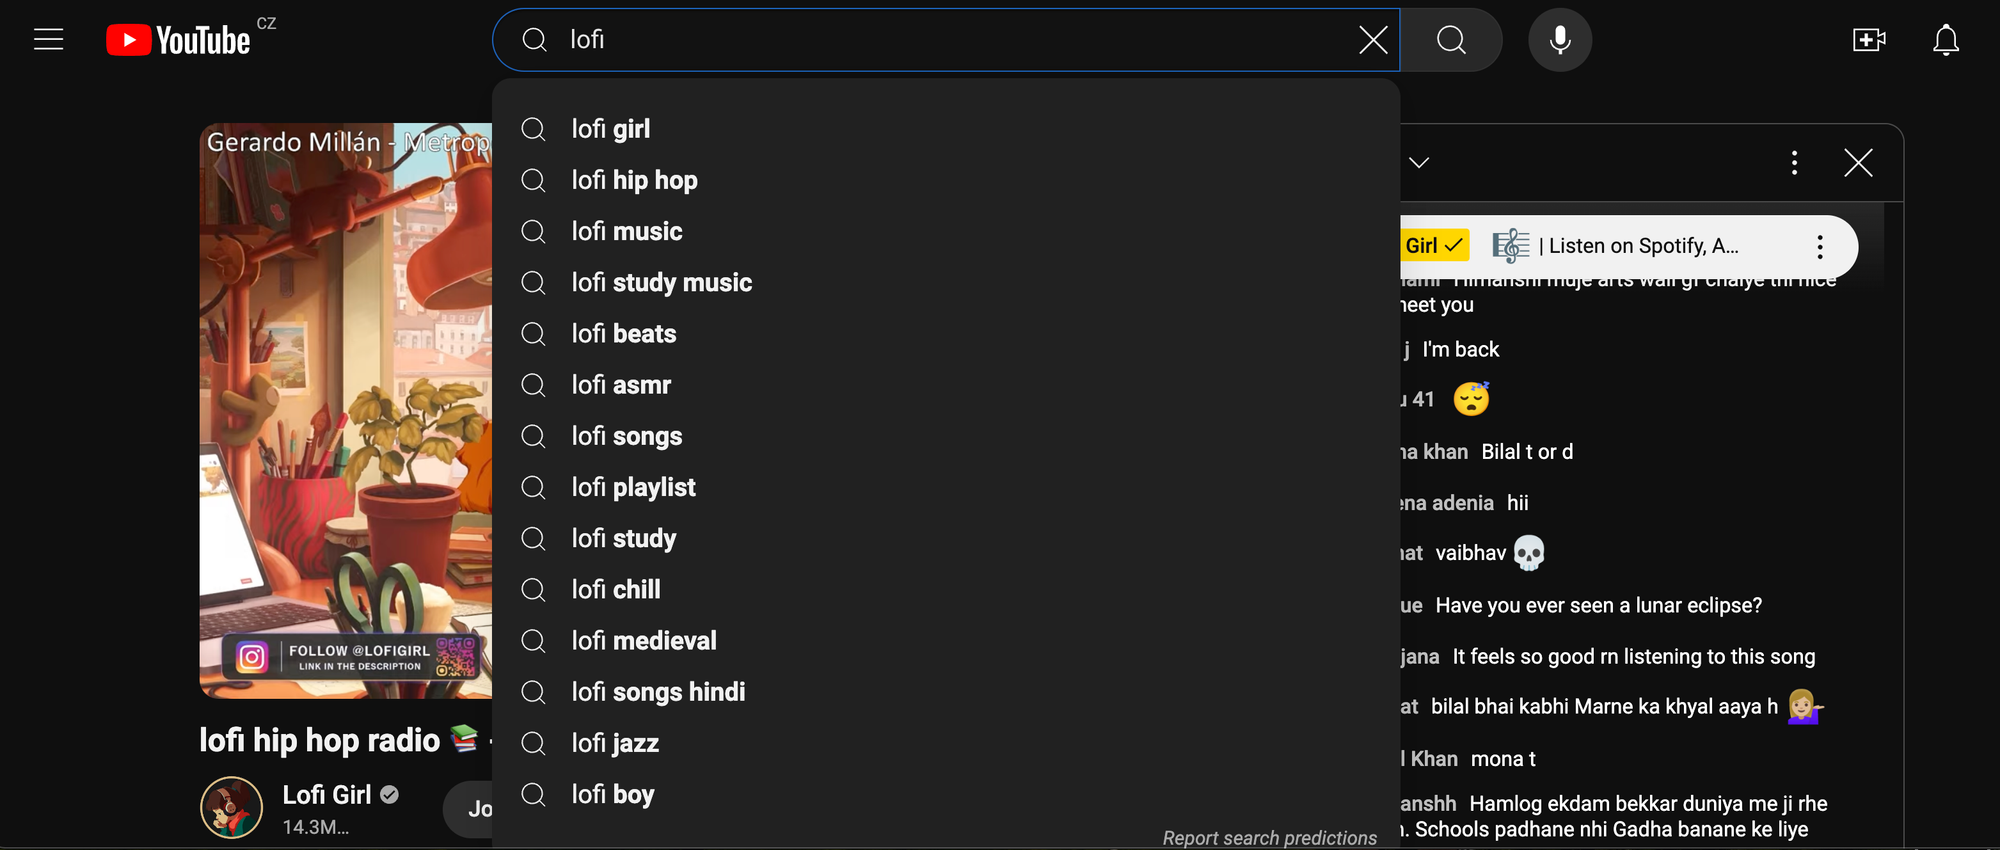 YouTube Search Bar Scraper can extract these keywords. 